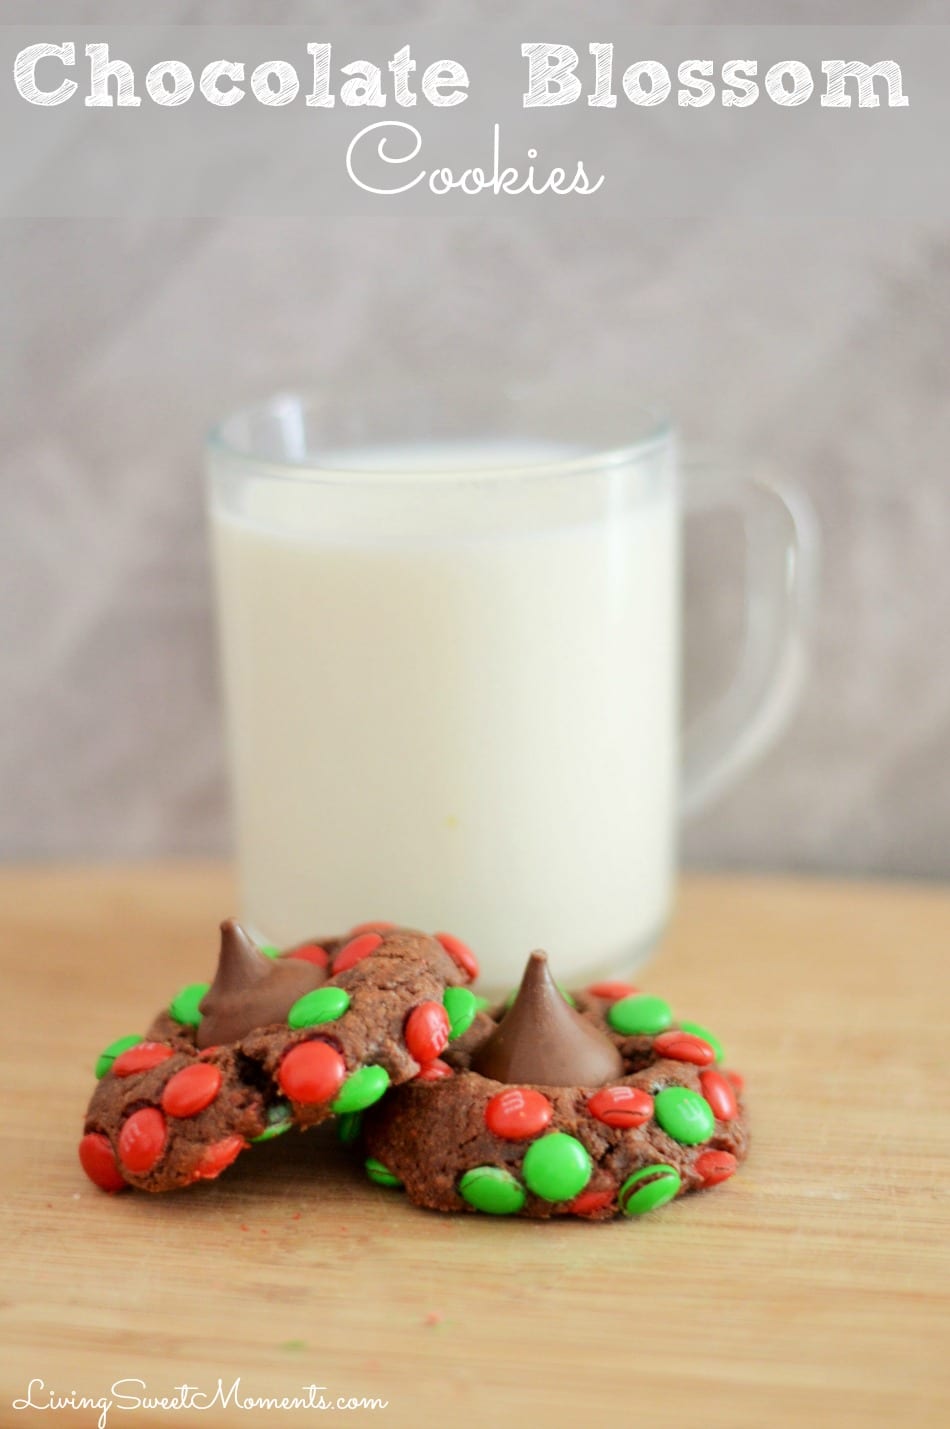 Delicious Chocolate Blossom Cookies made with M&M's and Chocolate Kisses! Easy to make and delicious. The cookies are soft on the inside and crunchy outside